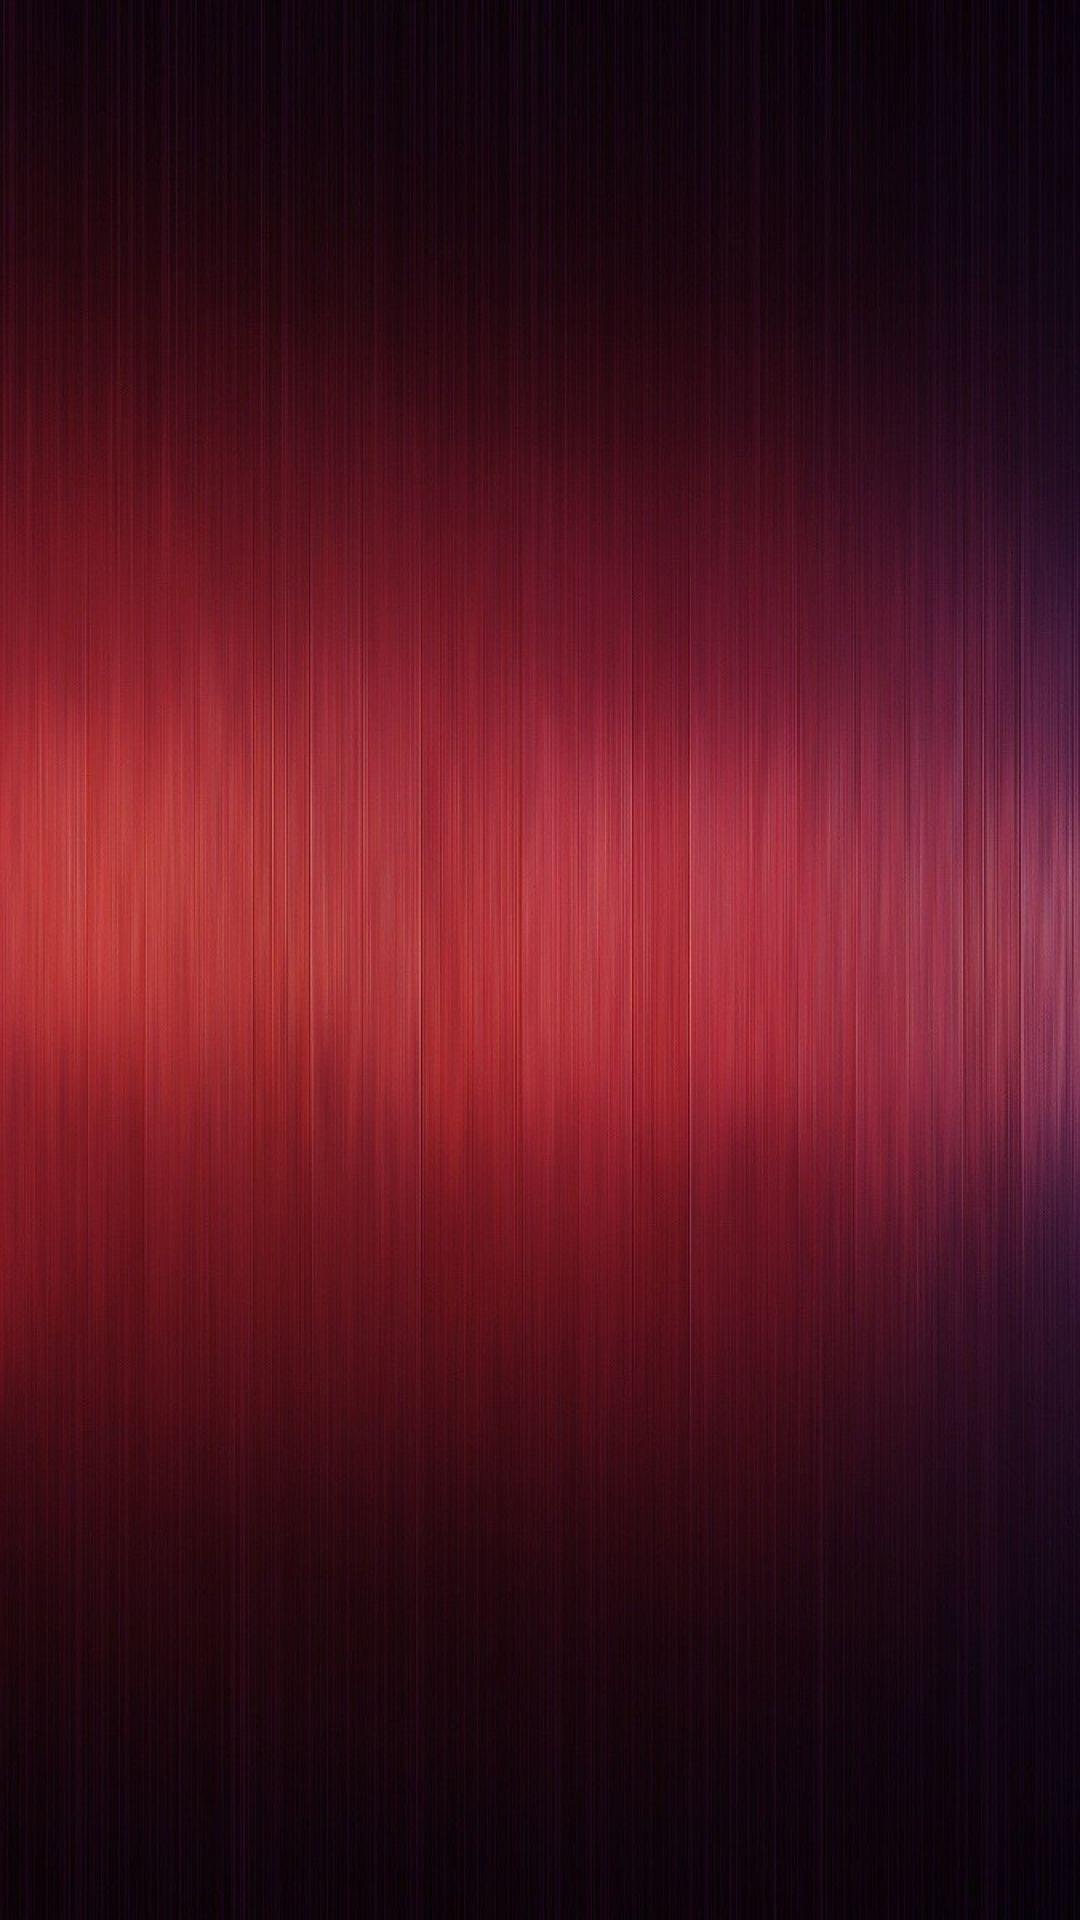 Watercolor paint texture dark maroon wallpaper background  free image by  rawpixelc  Pink wallpaper backgrounds Watercolour texture background  Maroon aesthetic